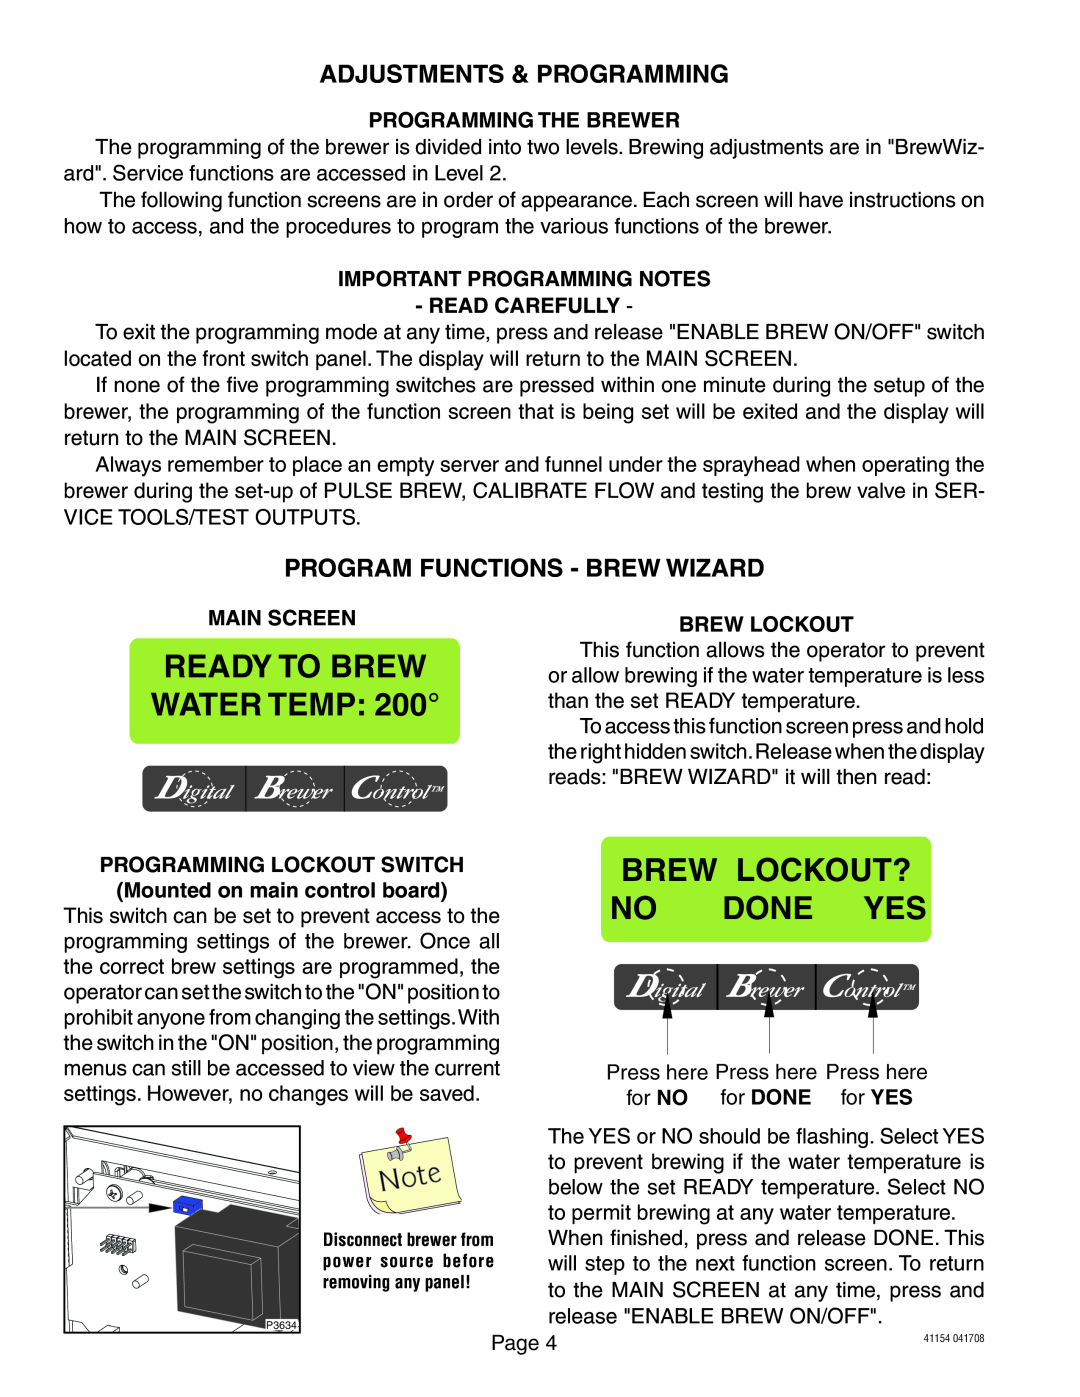 Bunn Axiom Brew Lockout? No Done Yes, Adjustments & Programming, Program Functions - Brew Wizard, Programming The Brewer 